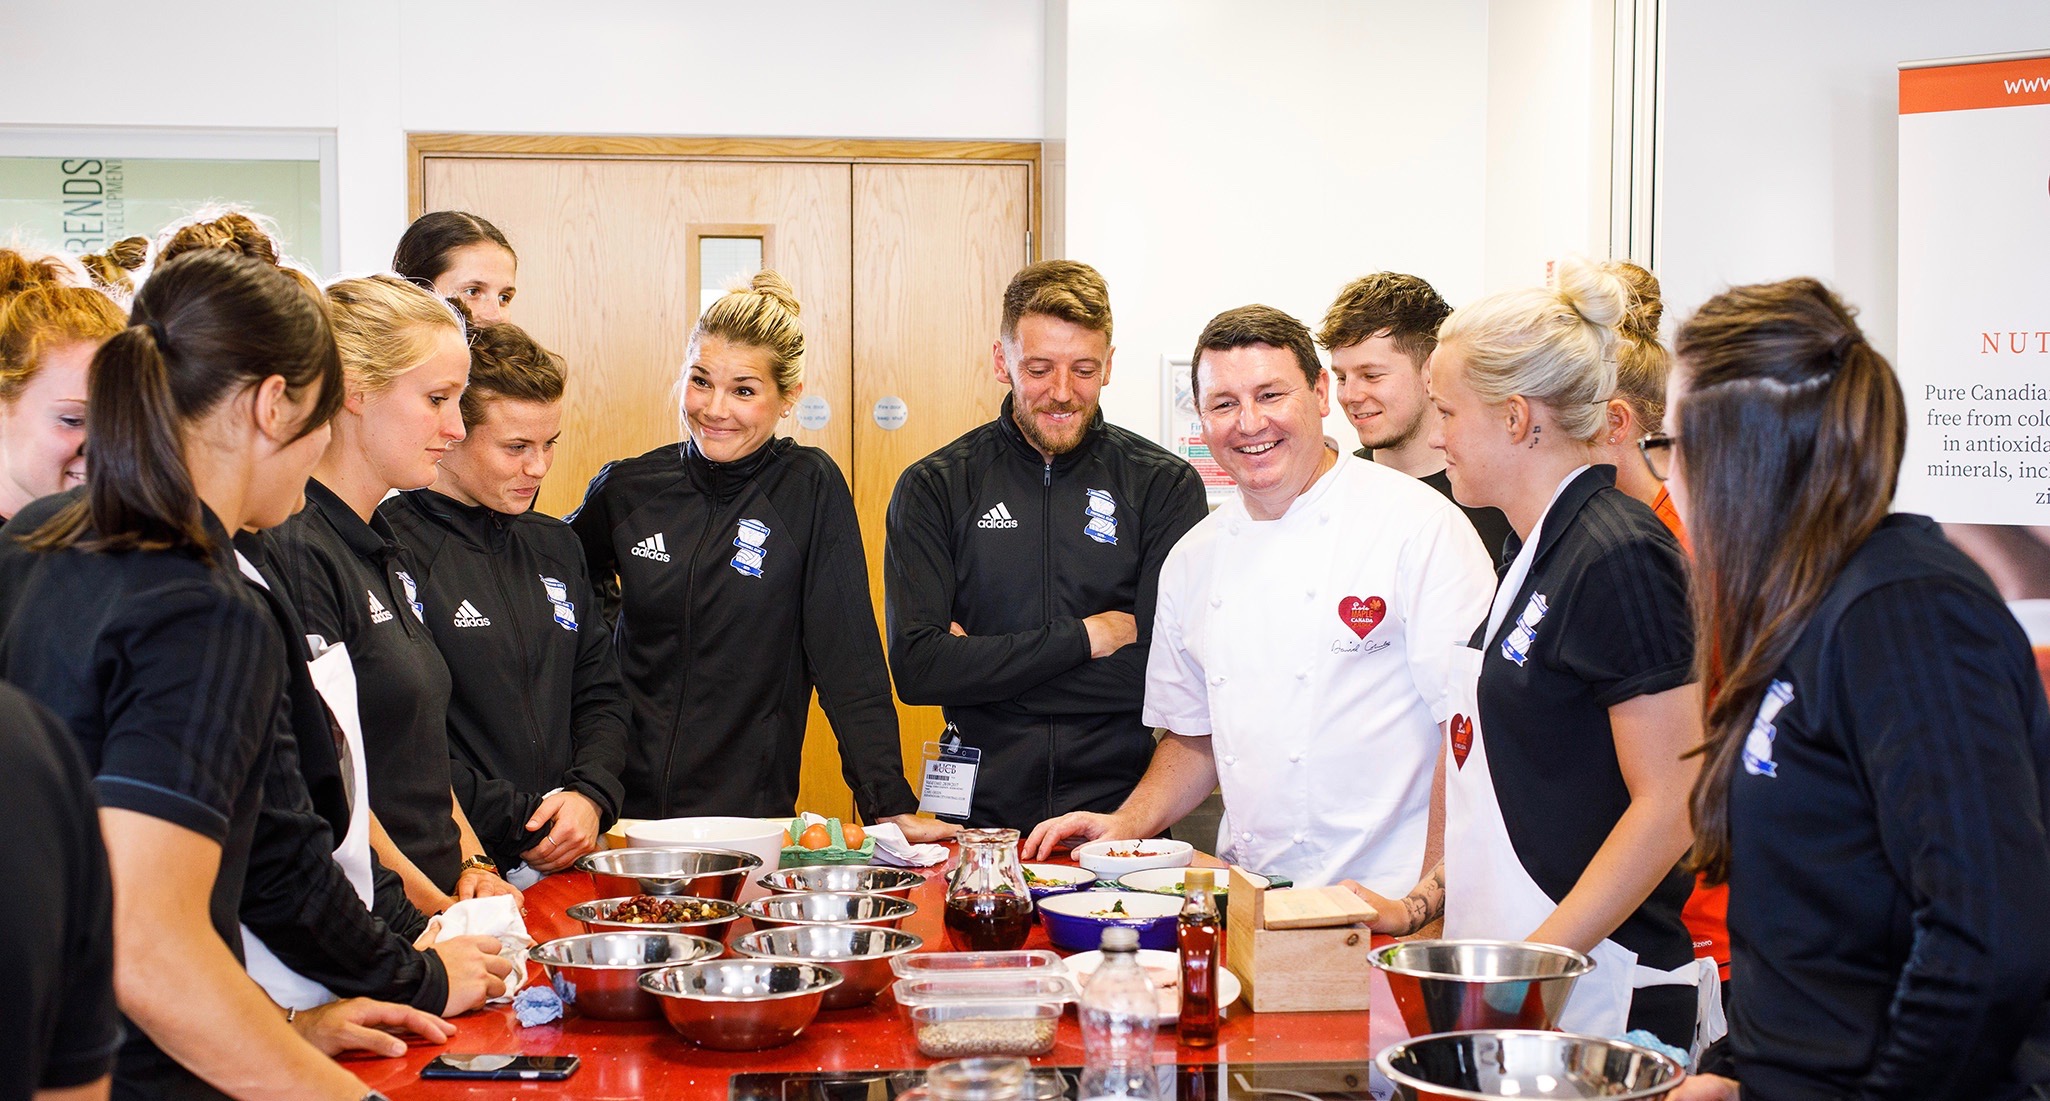 Birmingham City Ladies Football Club and David Colcombe during their exclusive nutrition session